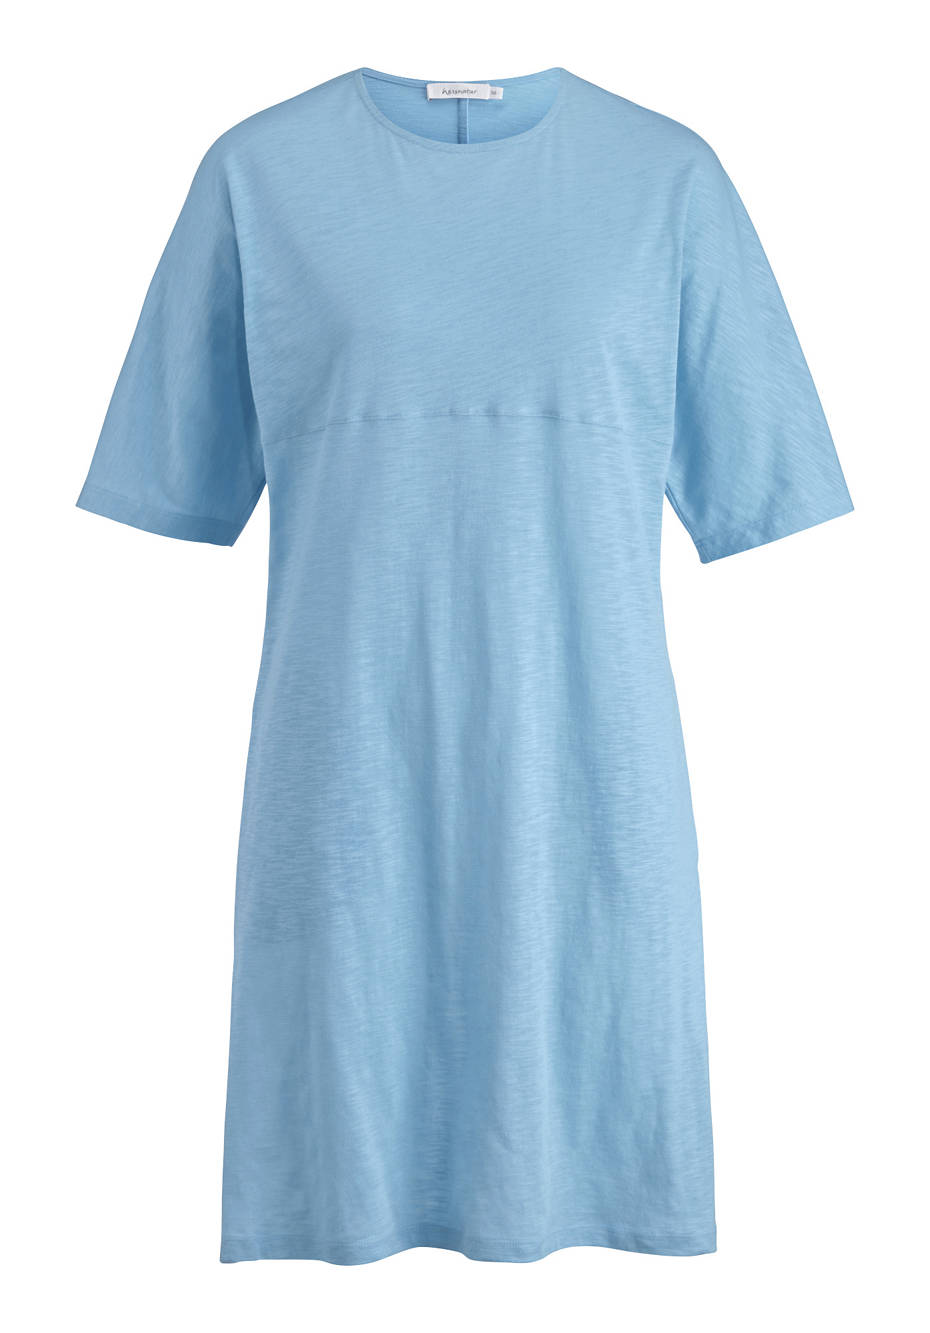 Jersey dress made from pure organic cotton